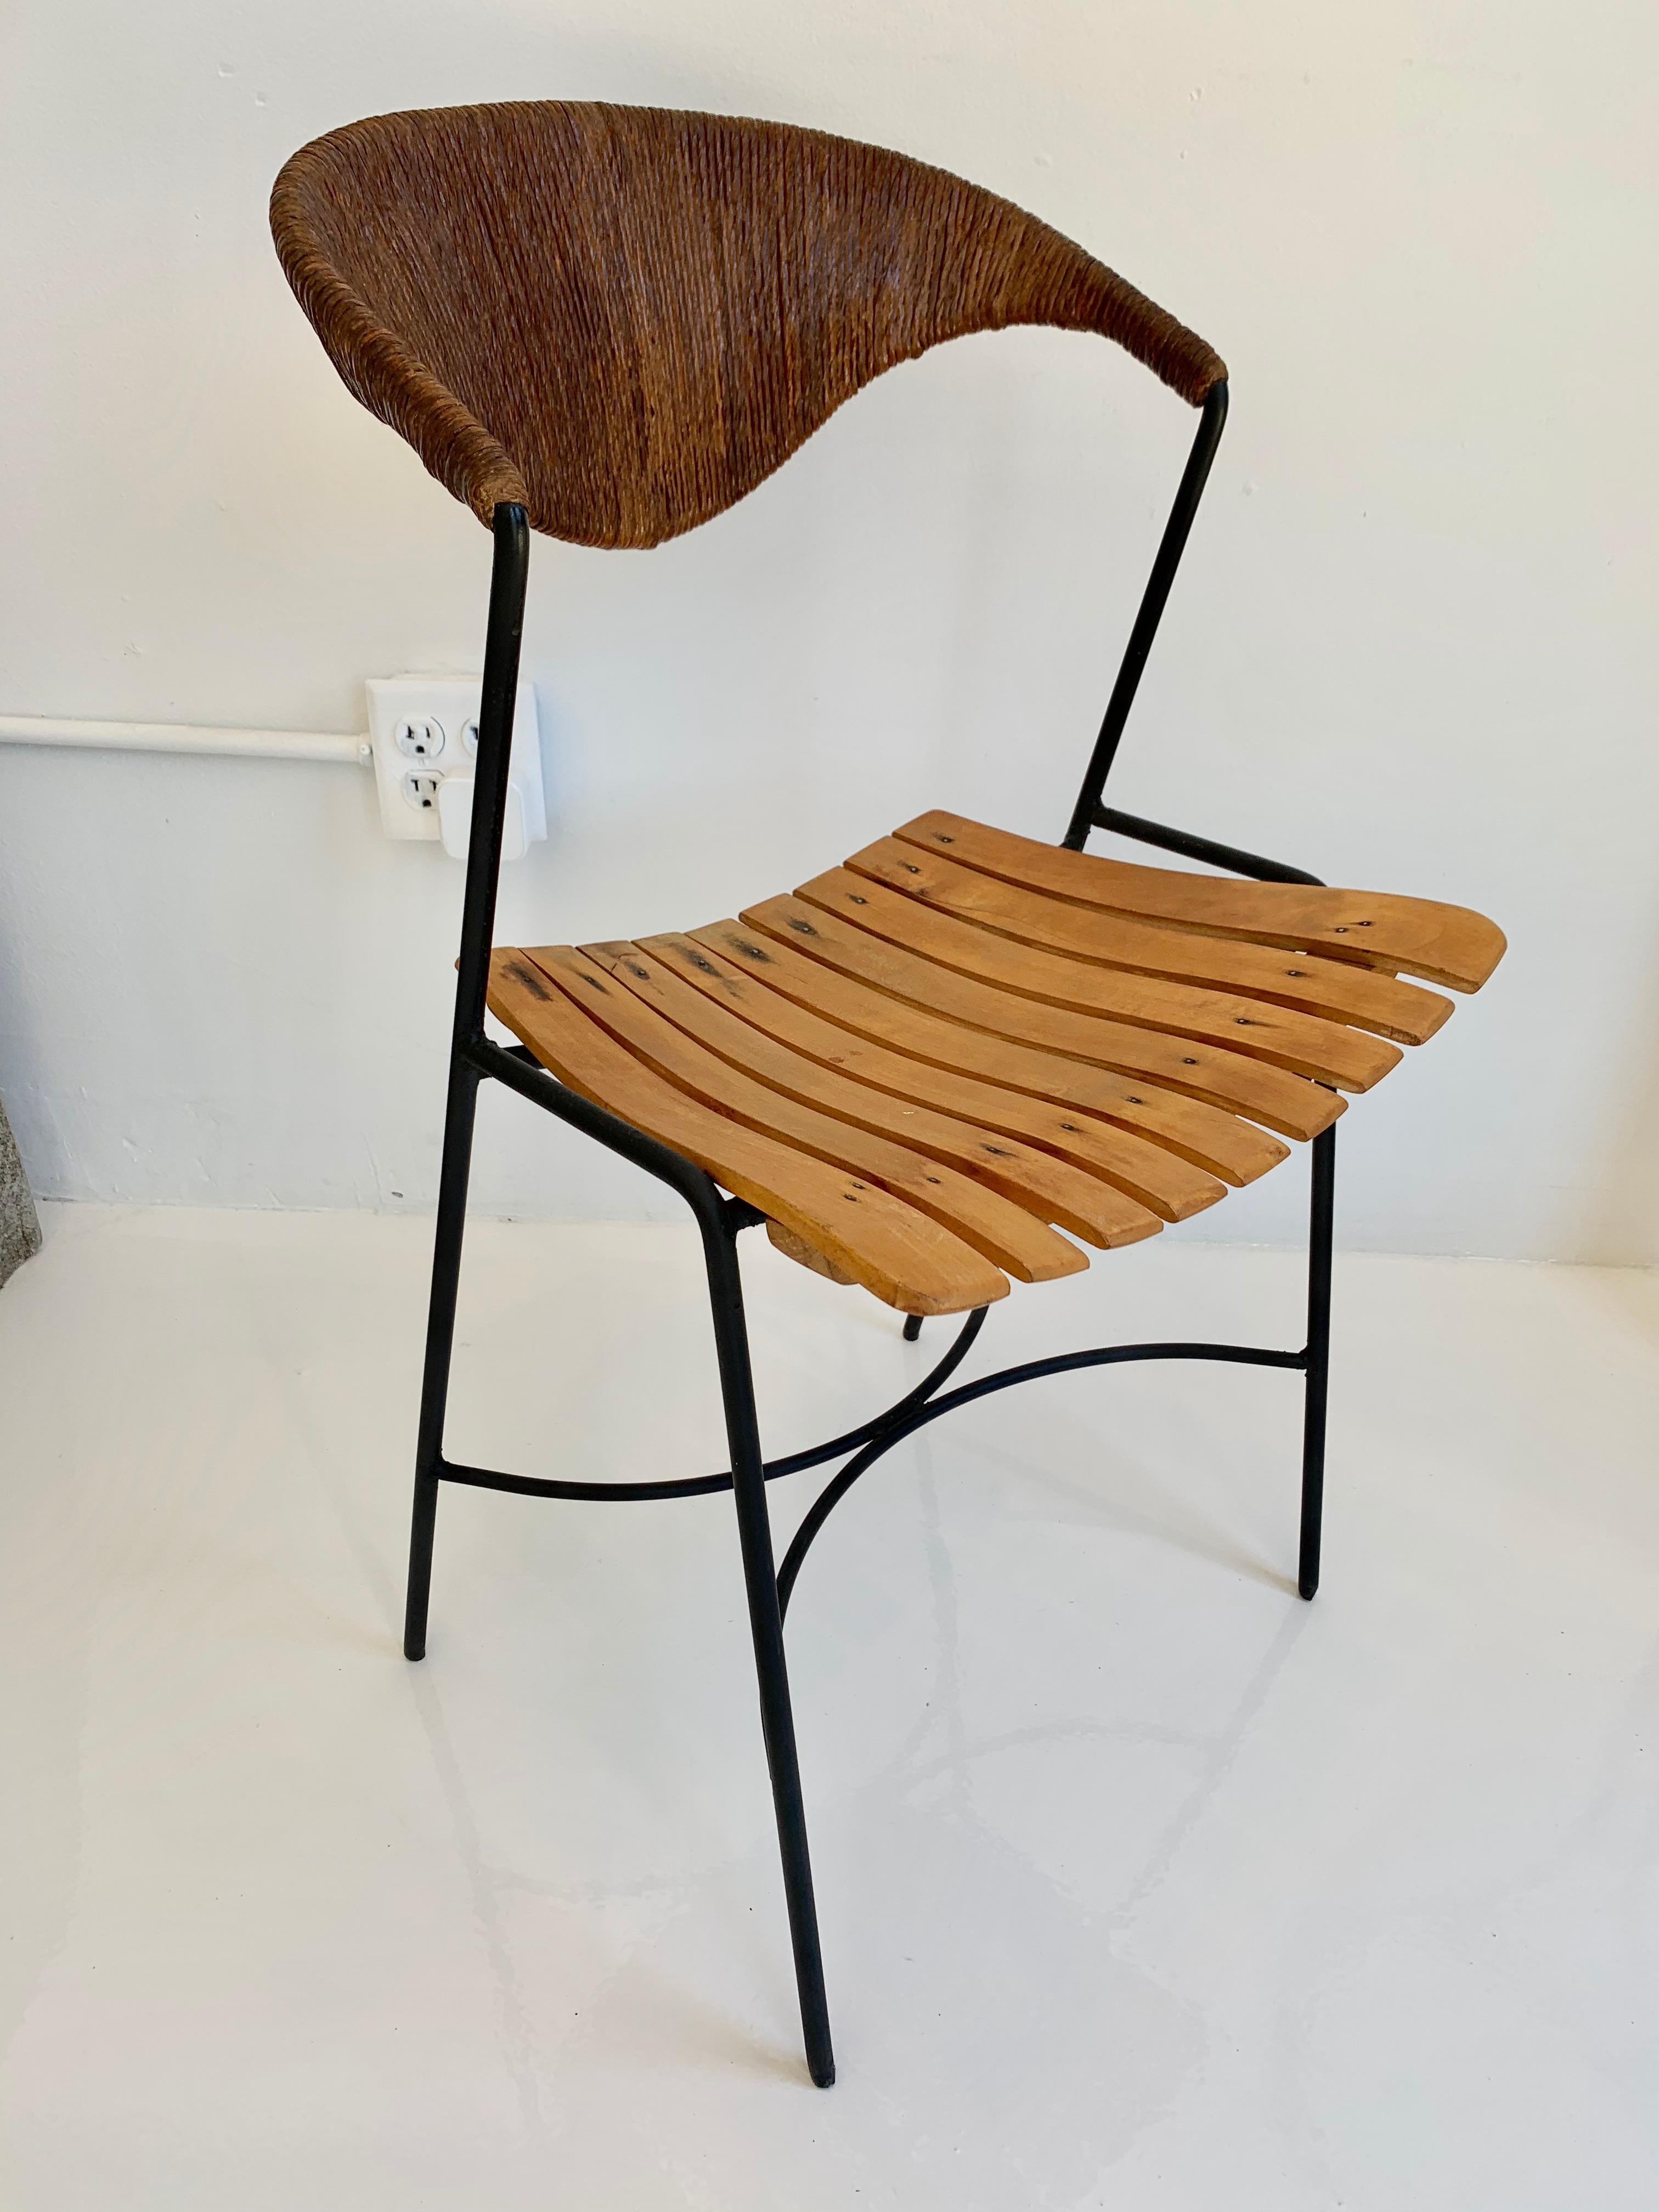 Arthur Umanoff Wood and Rush Sculptural Chairs For Sale 2